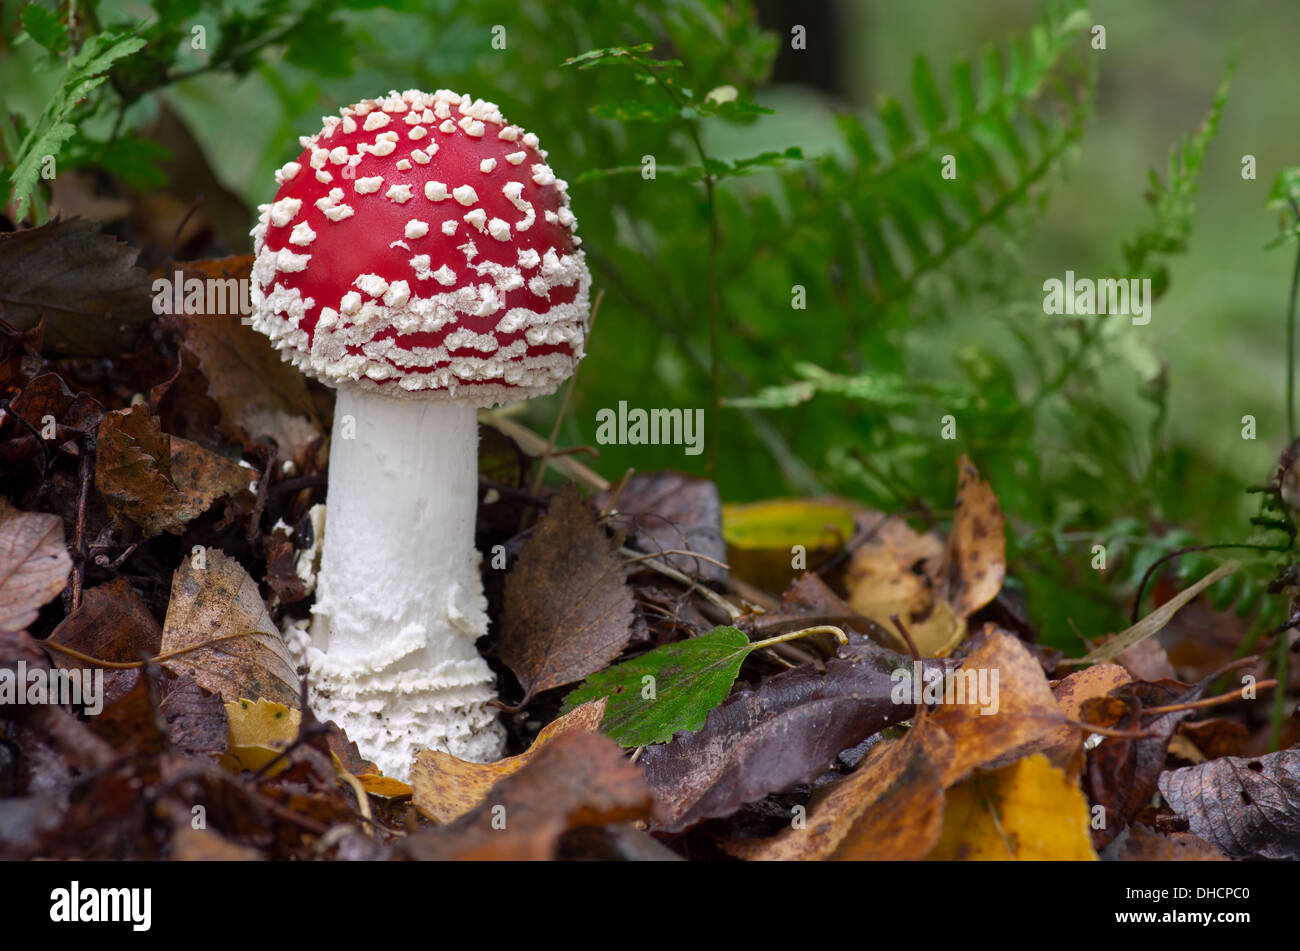 A lovely spotted red Fly Agaric mushroom among fallen Autumn leaves. Stock Photo